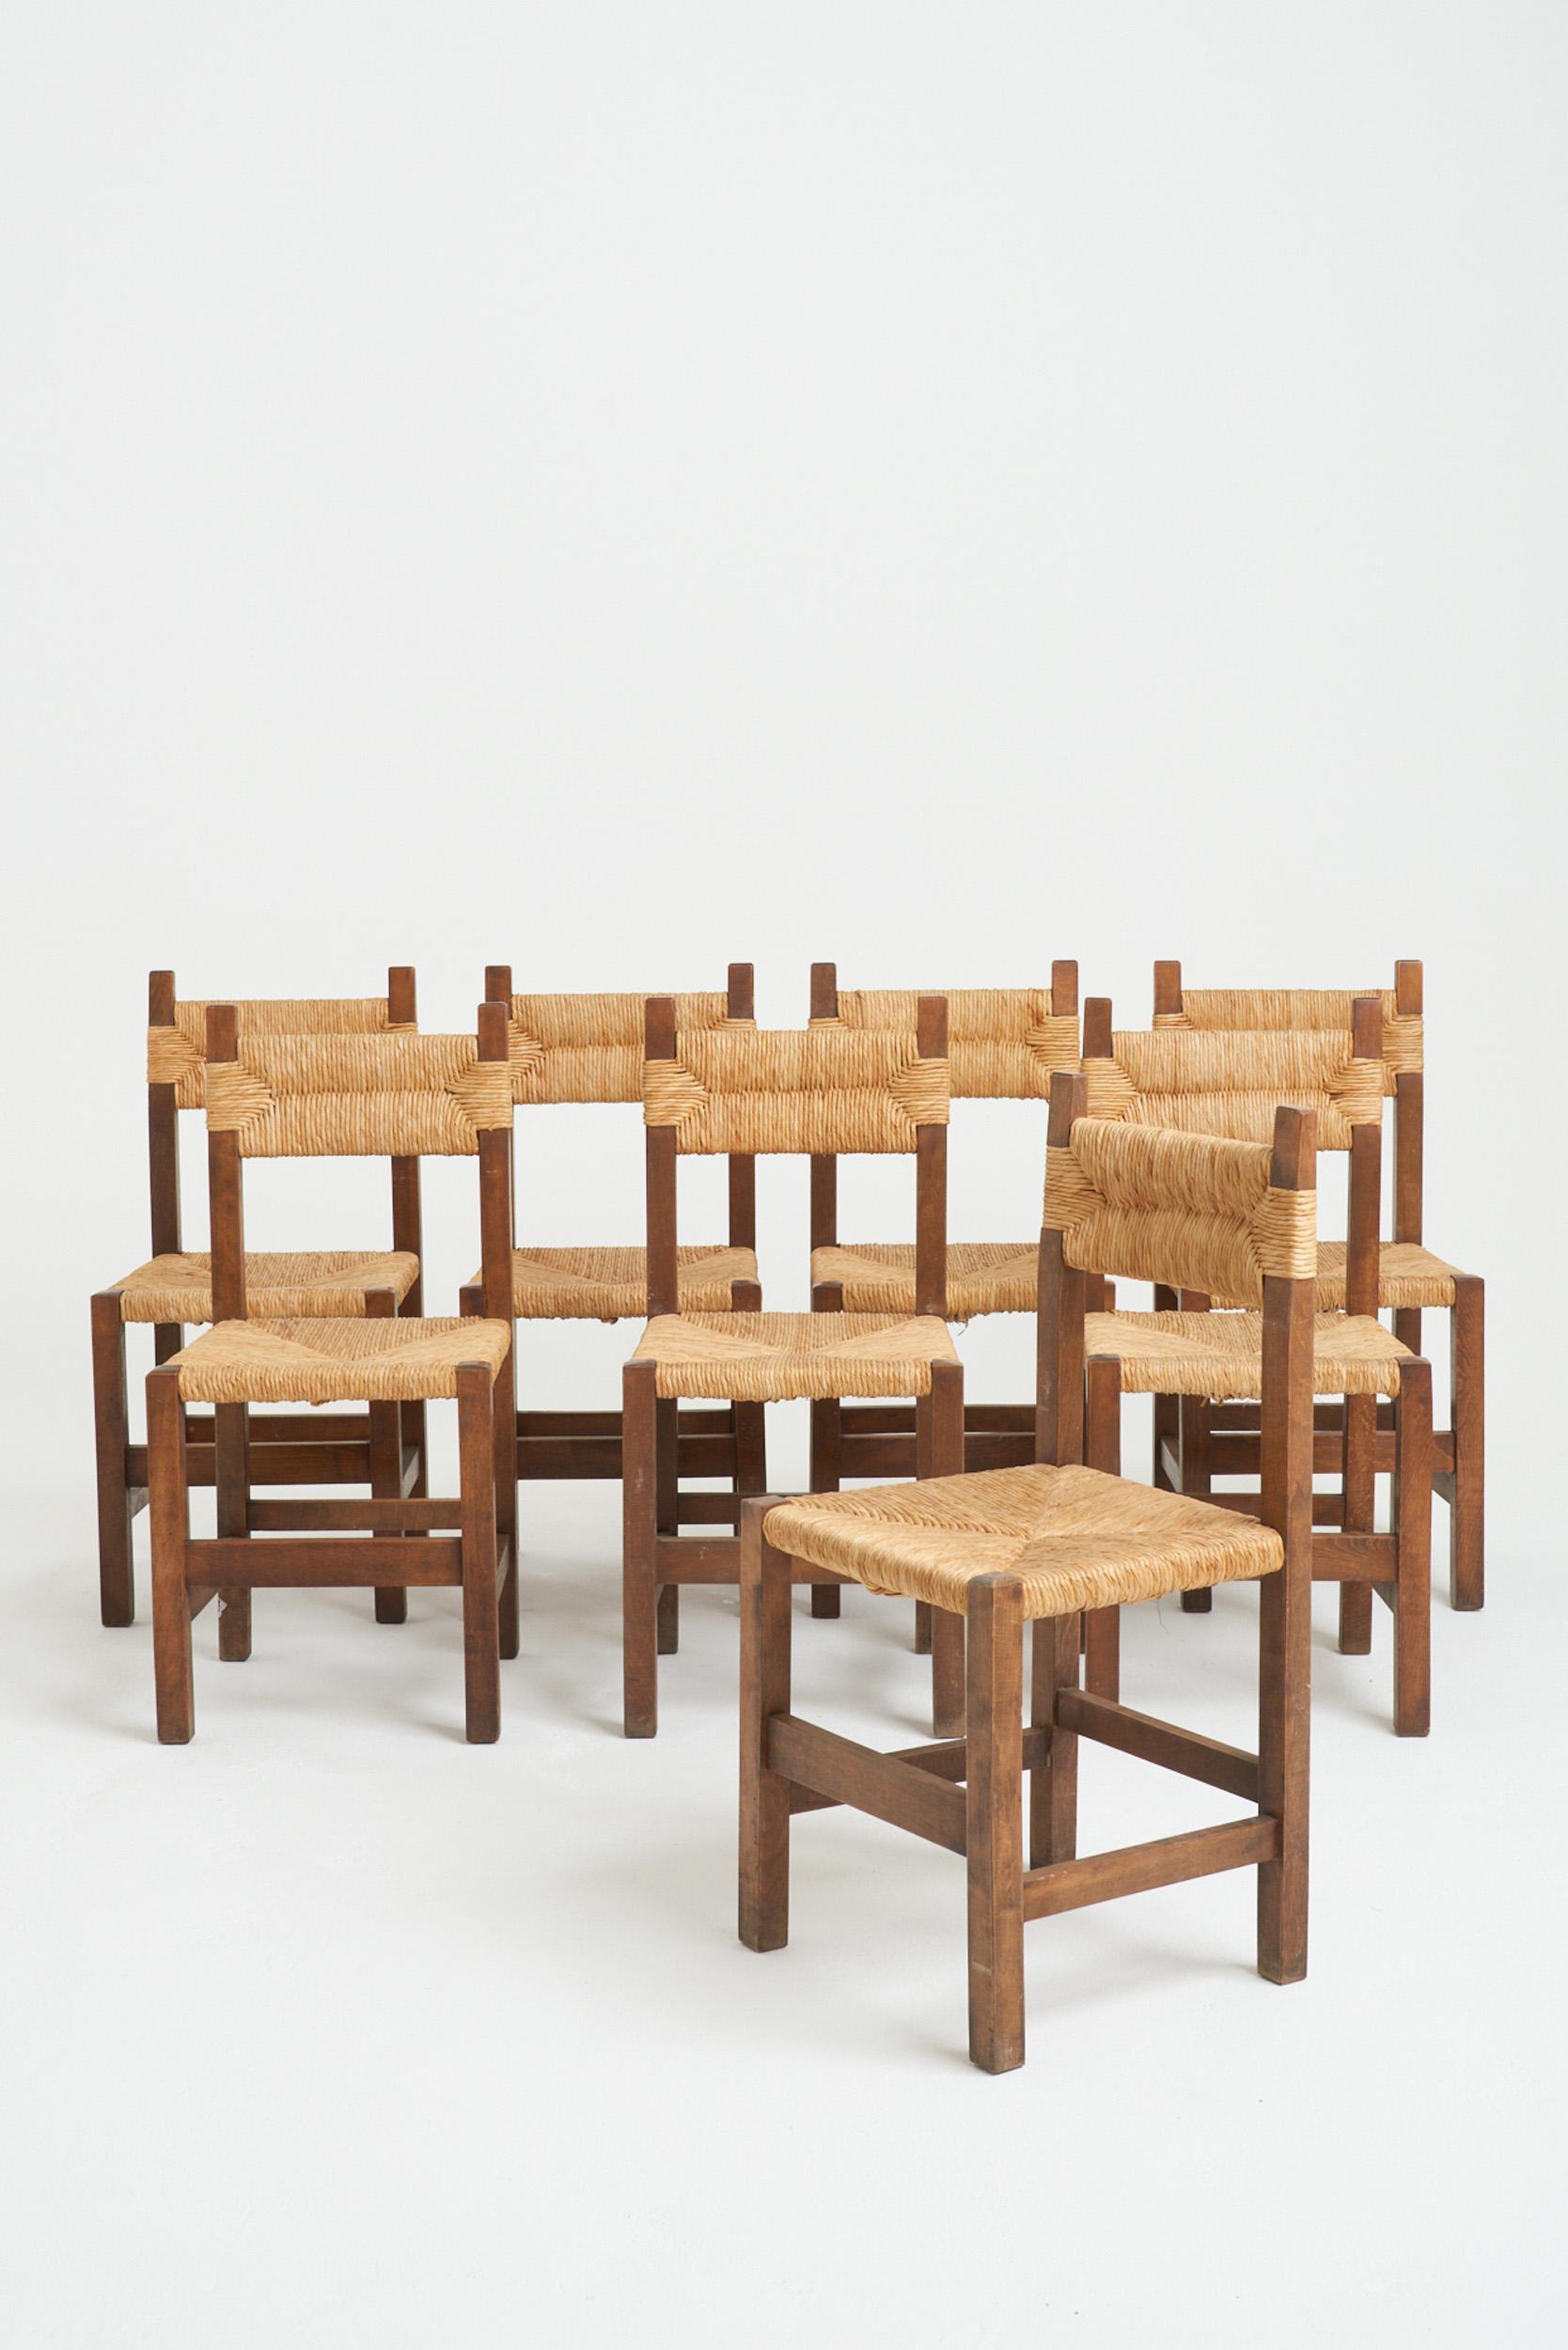 A set of eight rush and beech dining chairs, in the manner of Charlotte Perriand.
Spain, Mid 20th Century
87 cm high by 41 cm wide by 41 cm depth, seat height 45.5 cm